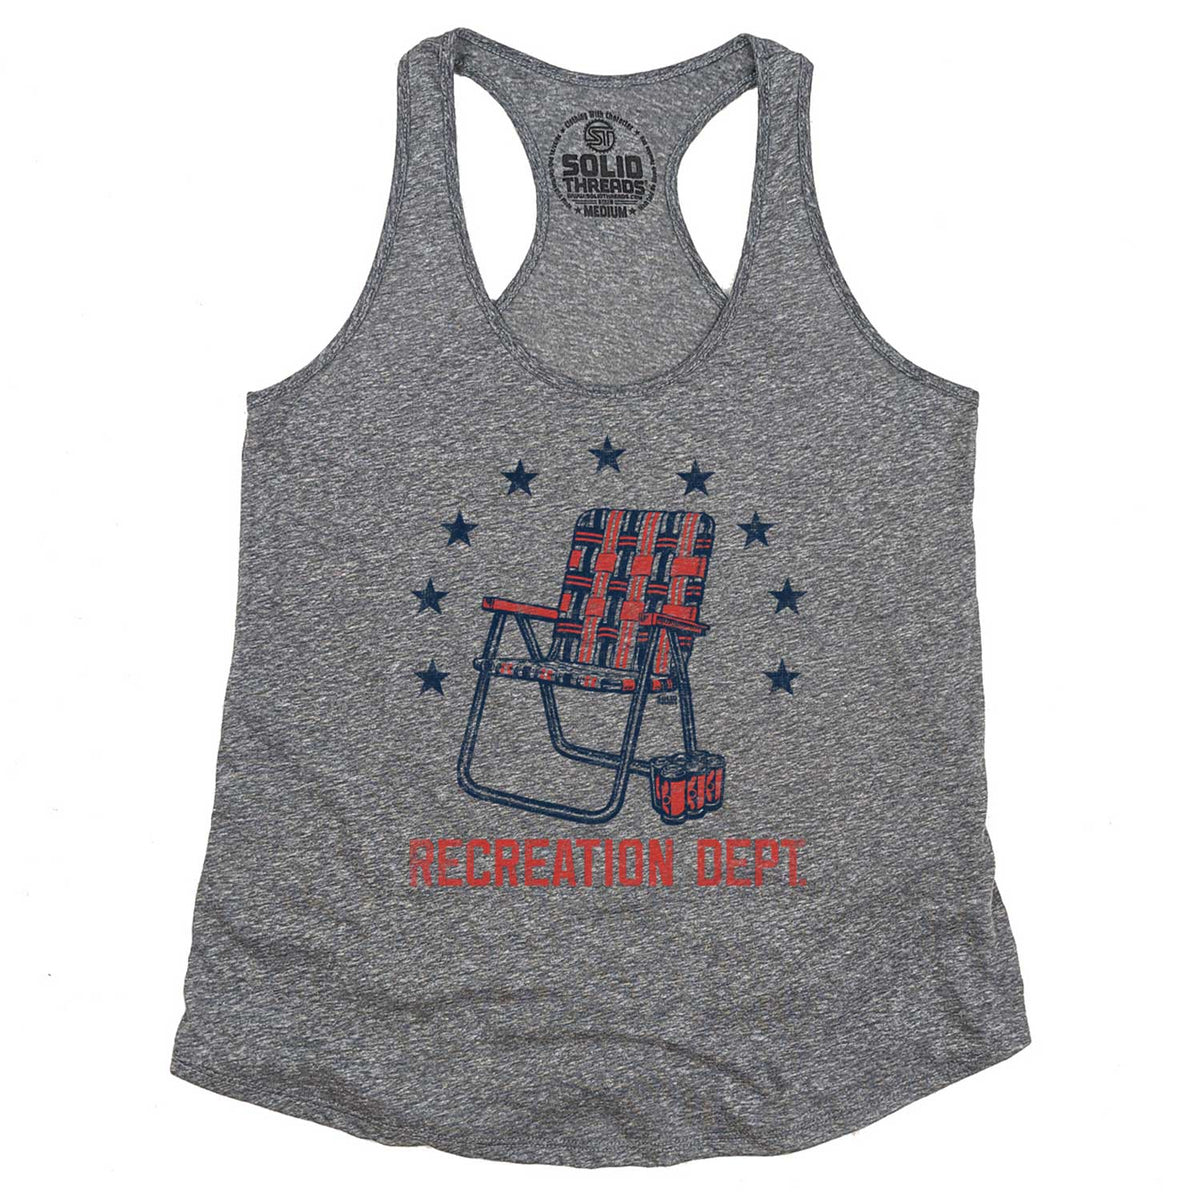 Women&#39;s Recreation Department Vintage Graphic Tank Top | Funny Drinking T-Shirt | Solid Threads